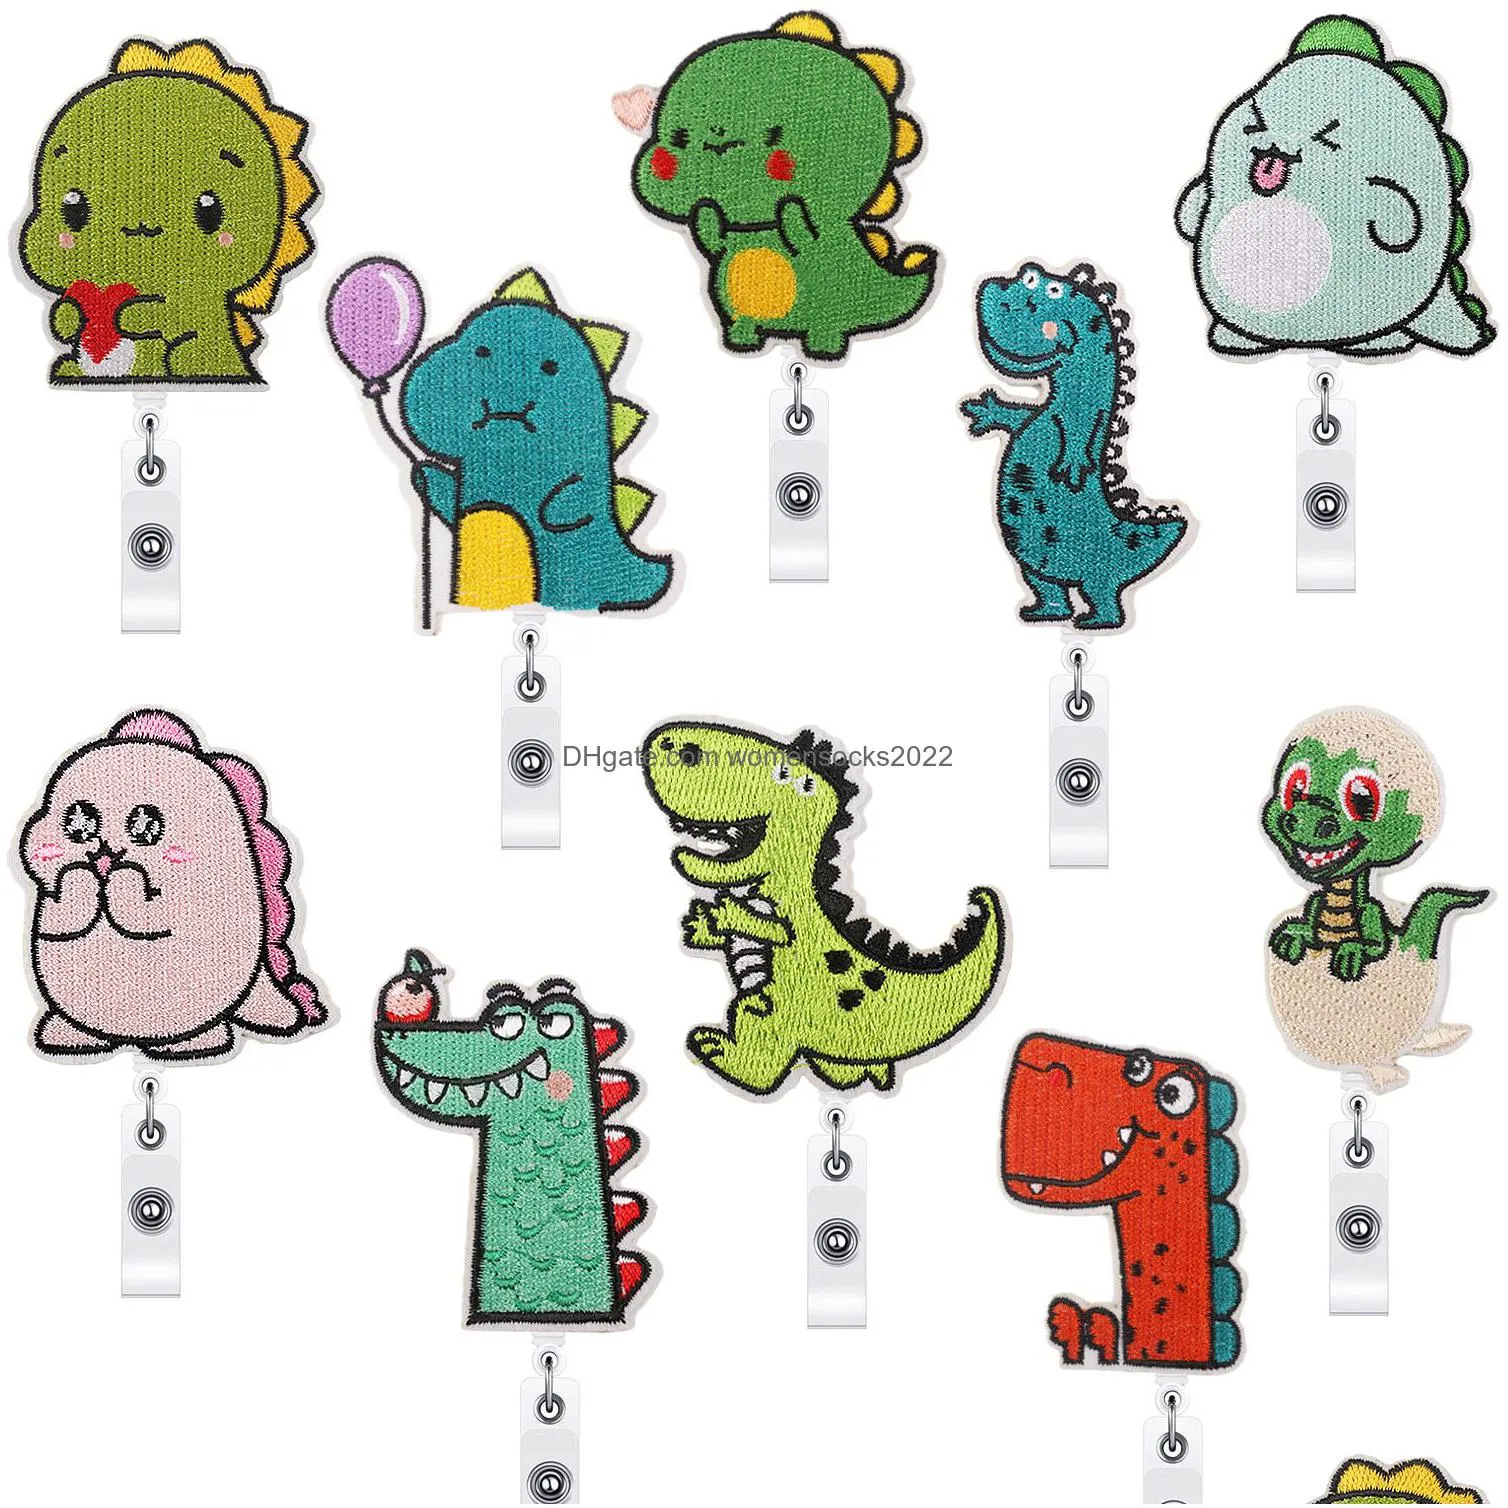 notions dinosaur emboridered retractable badge reels holder with alloy alligator clip cute cartoon animal id card decorative badge name tag